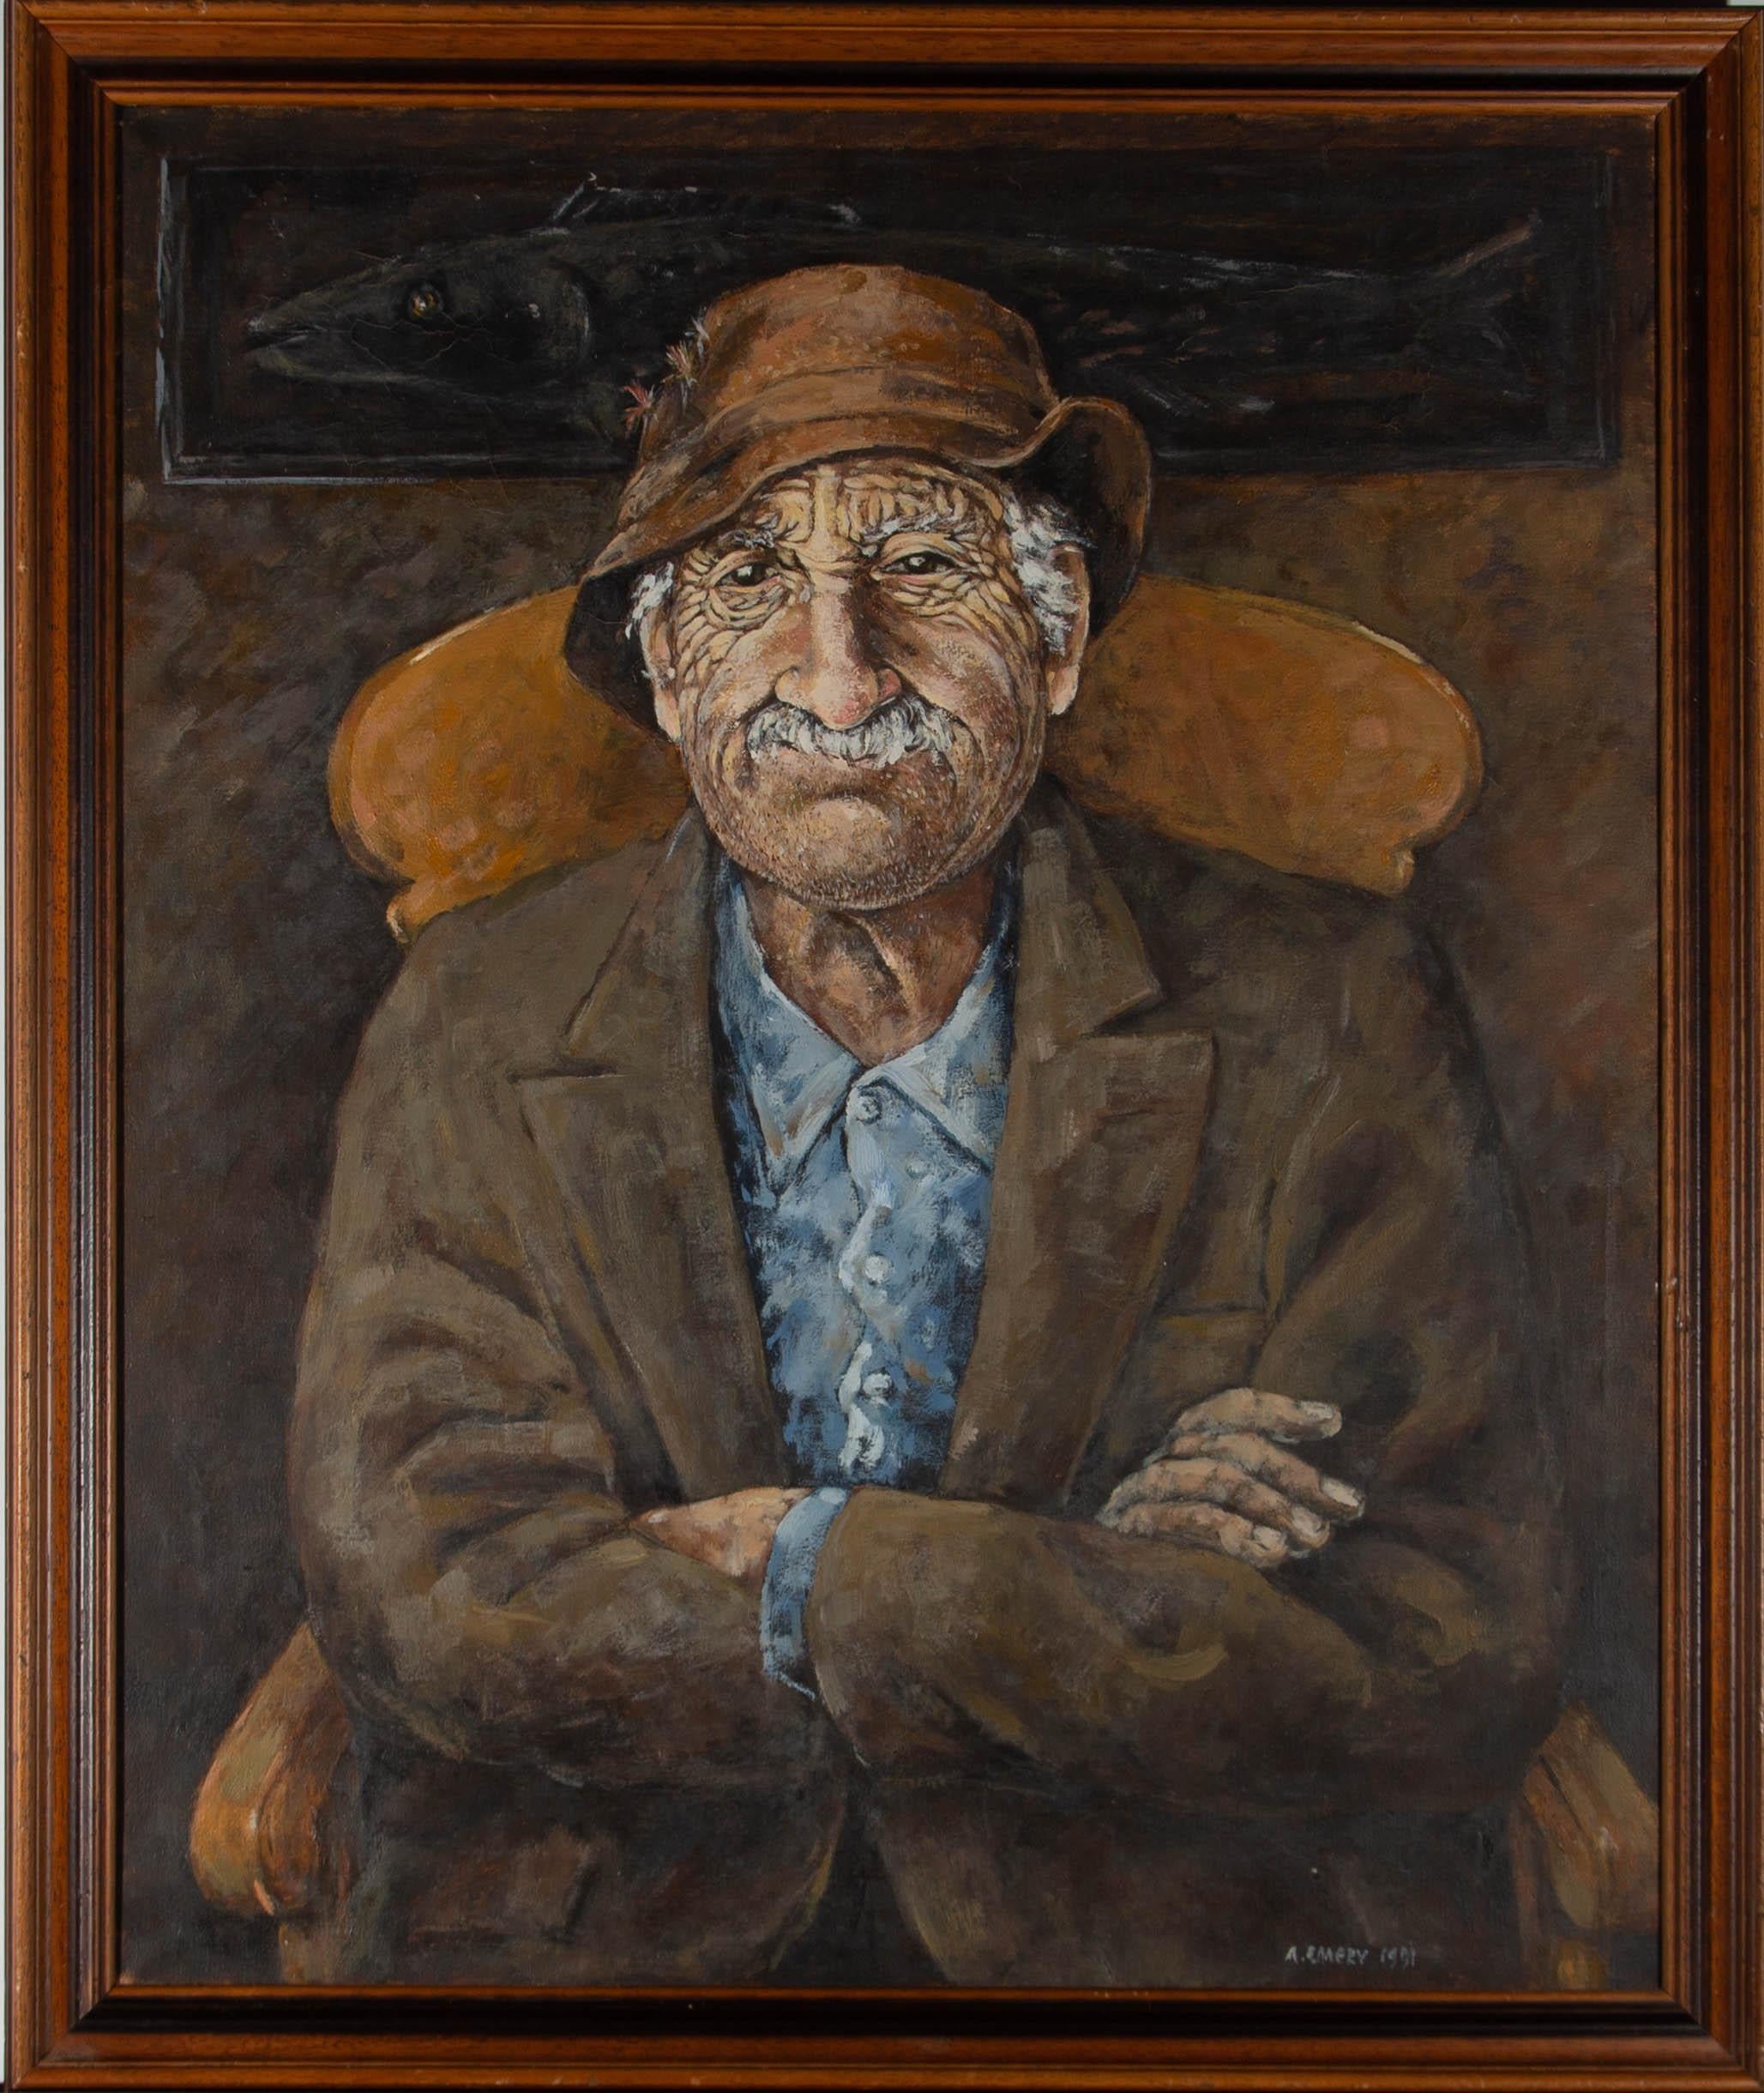 A charming oil portrait showing a very pleased looking fisherman with ample stubble. A large fish is mounted on the wall behind him as he sits in front of it, wide grin and arms folded. The artist has signed and dated to the lower right corner. The